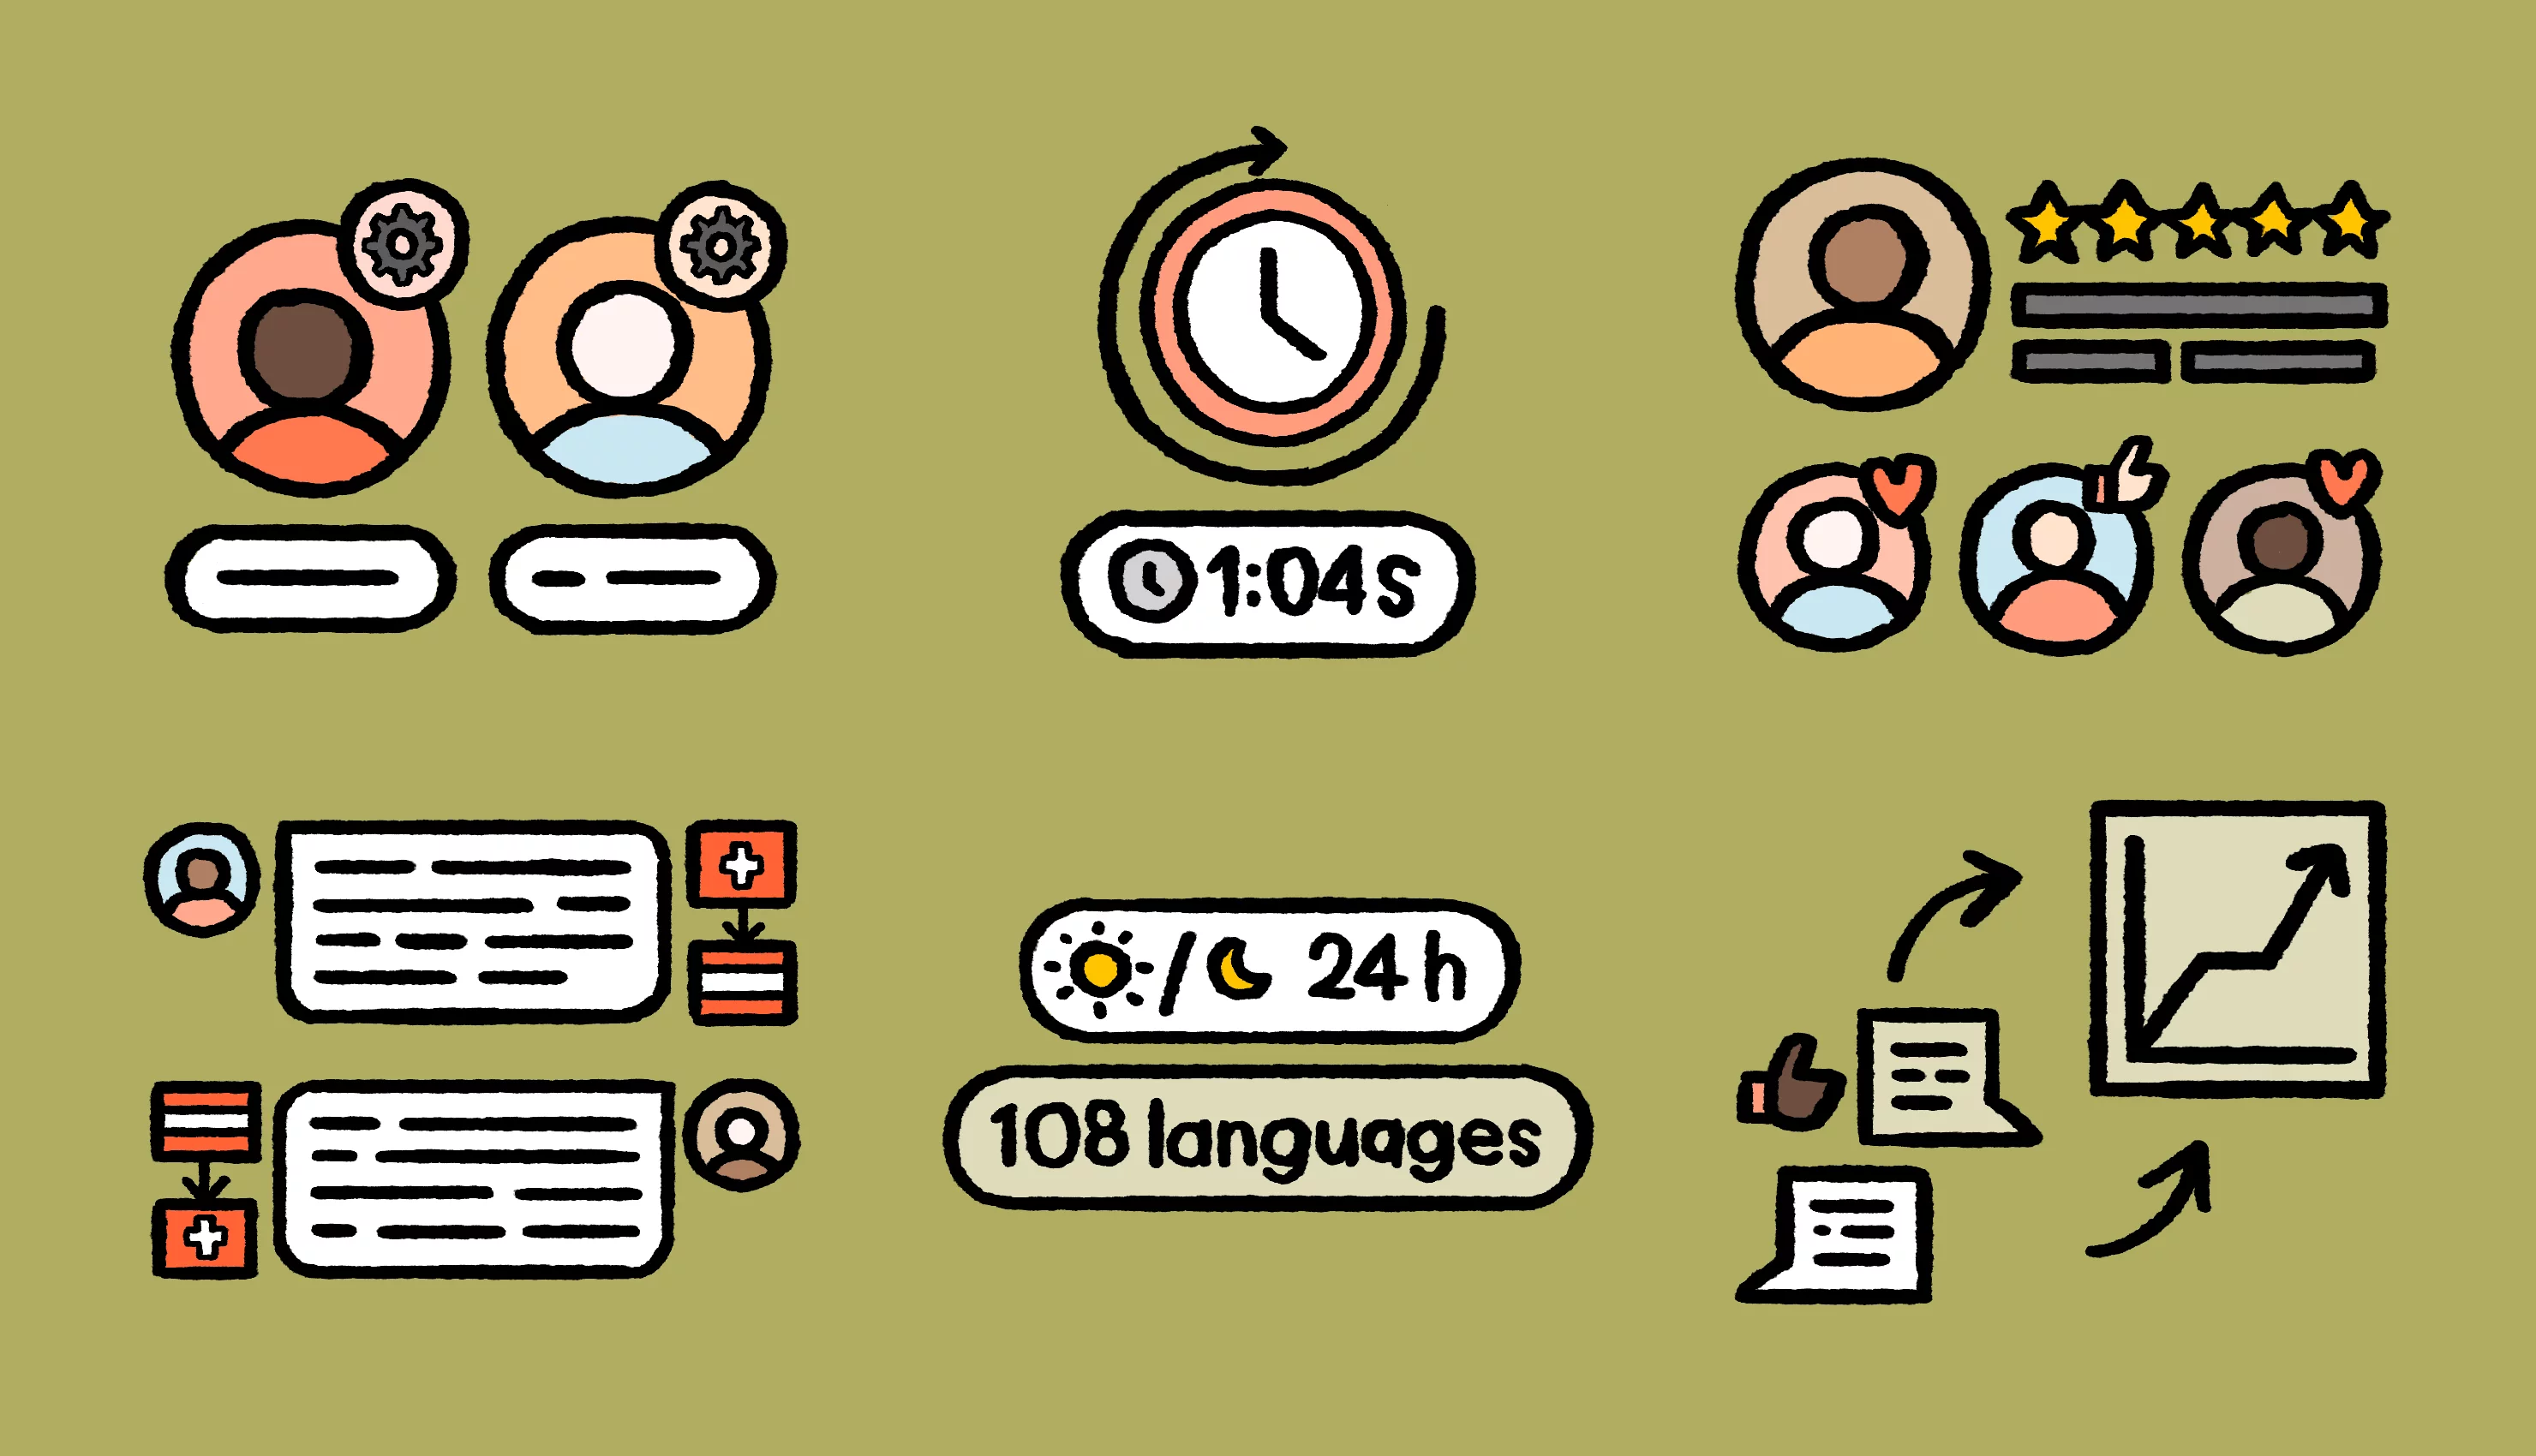 How our small support team answers every query in 1 minute, in 108 languages